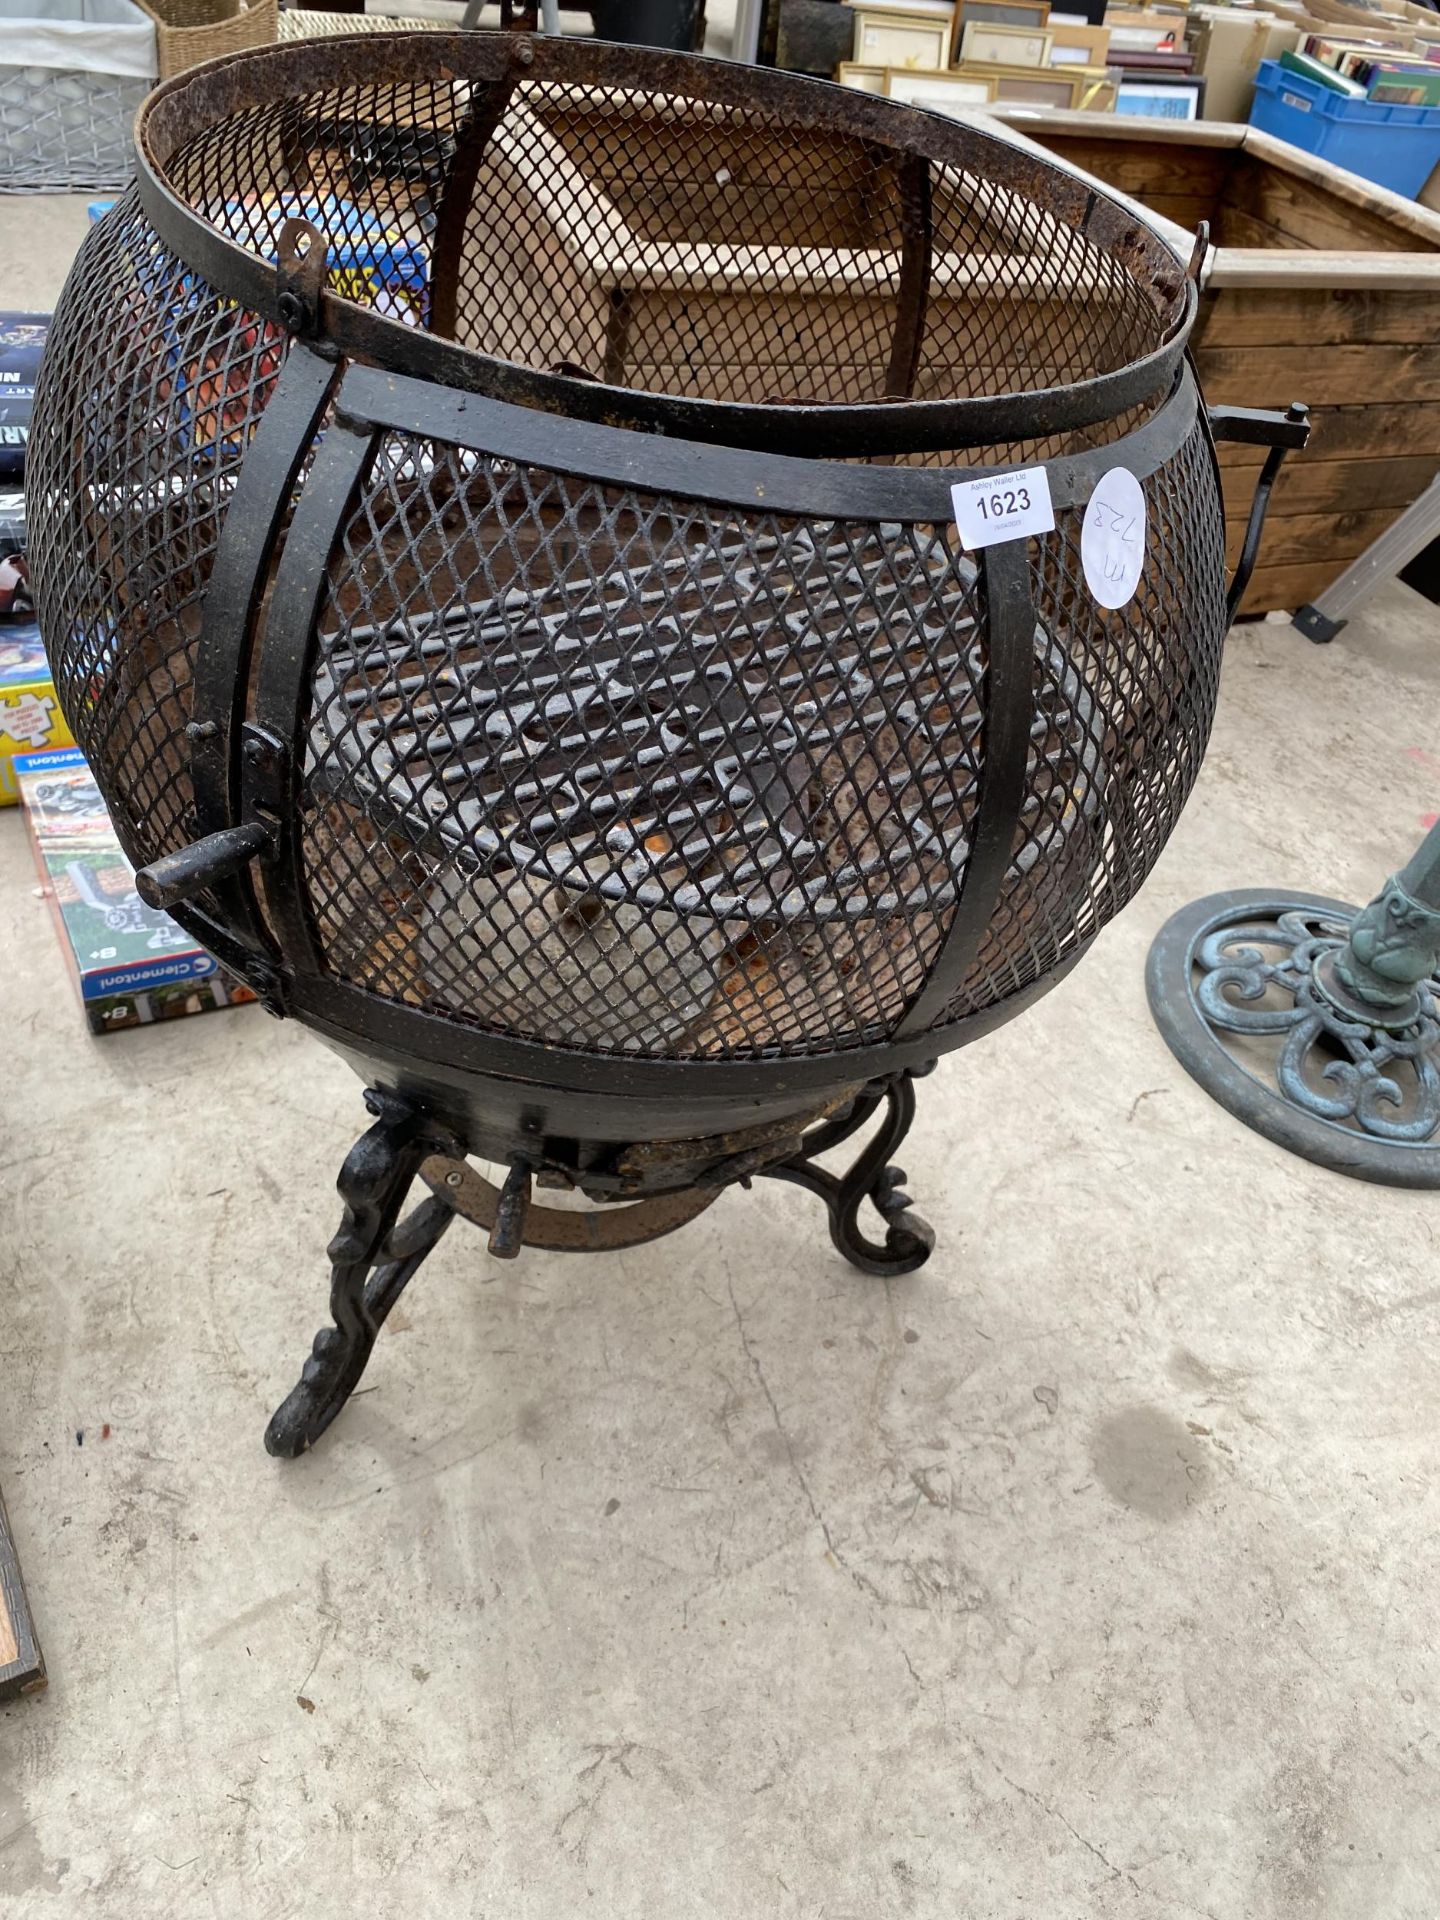 A METAL FIRE PIT WITH PIZZA SHELF